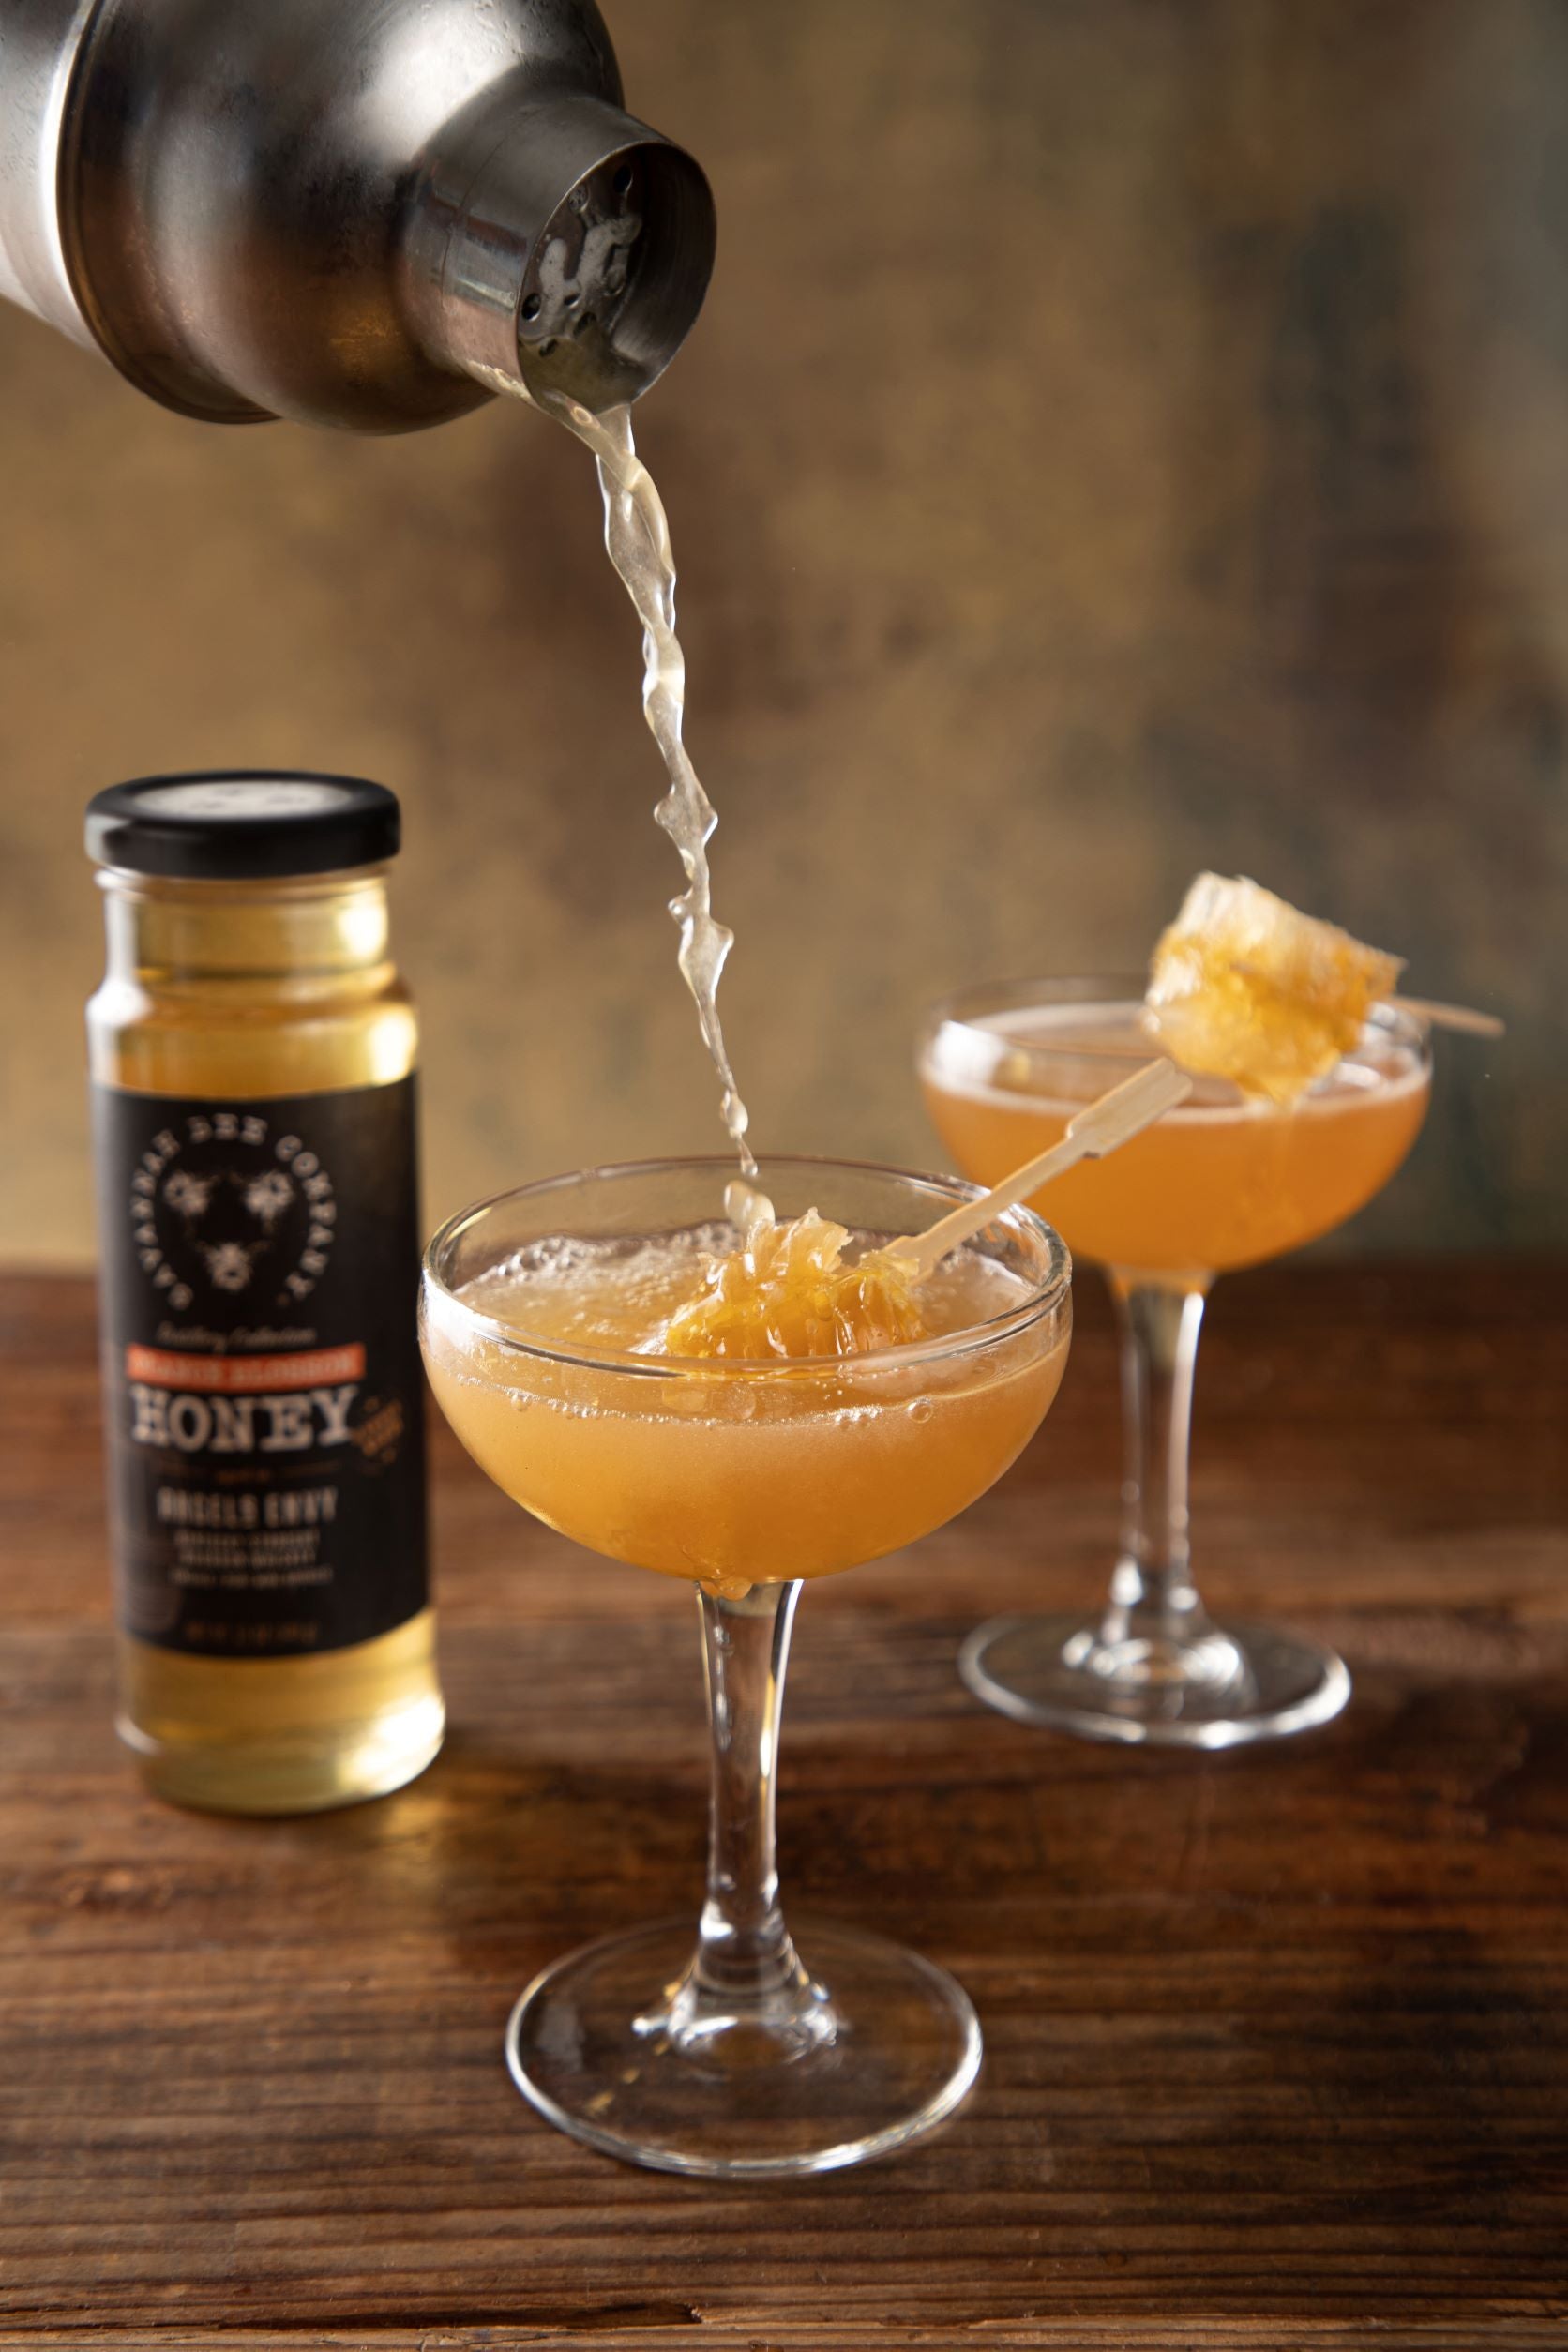 Two bourbon cocktails being poured from a shaker into cocktail glasses with a honeycomb garnish next to a 12 ounce Port Bourbon Barrel Aged Orange Blossom Honey jar.